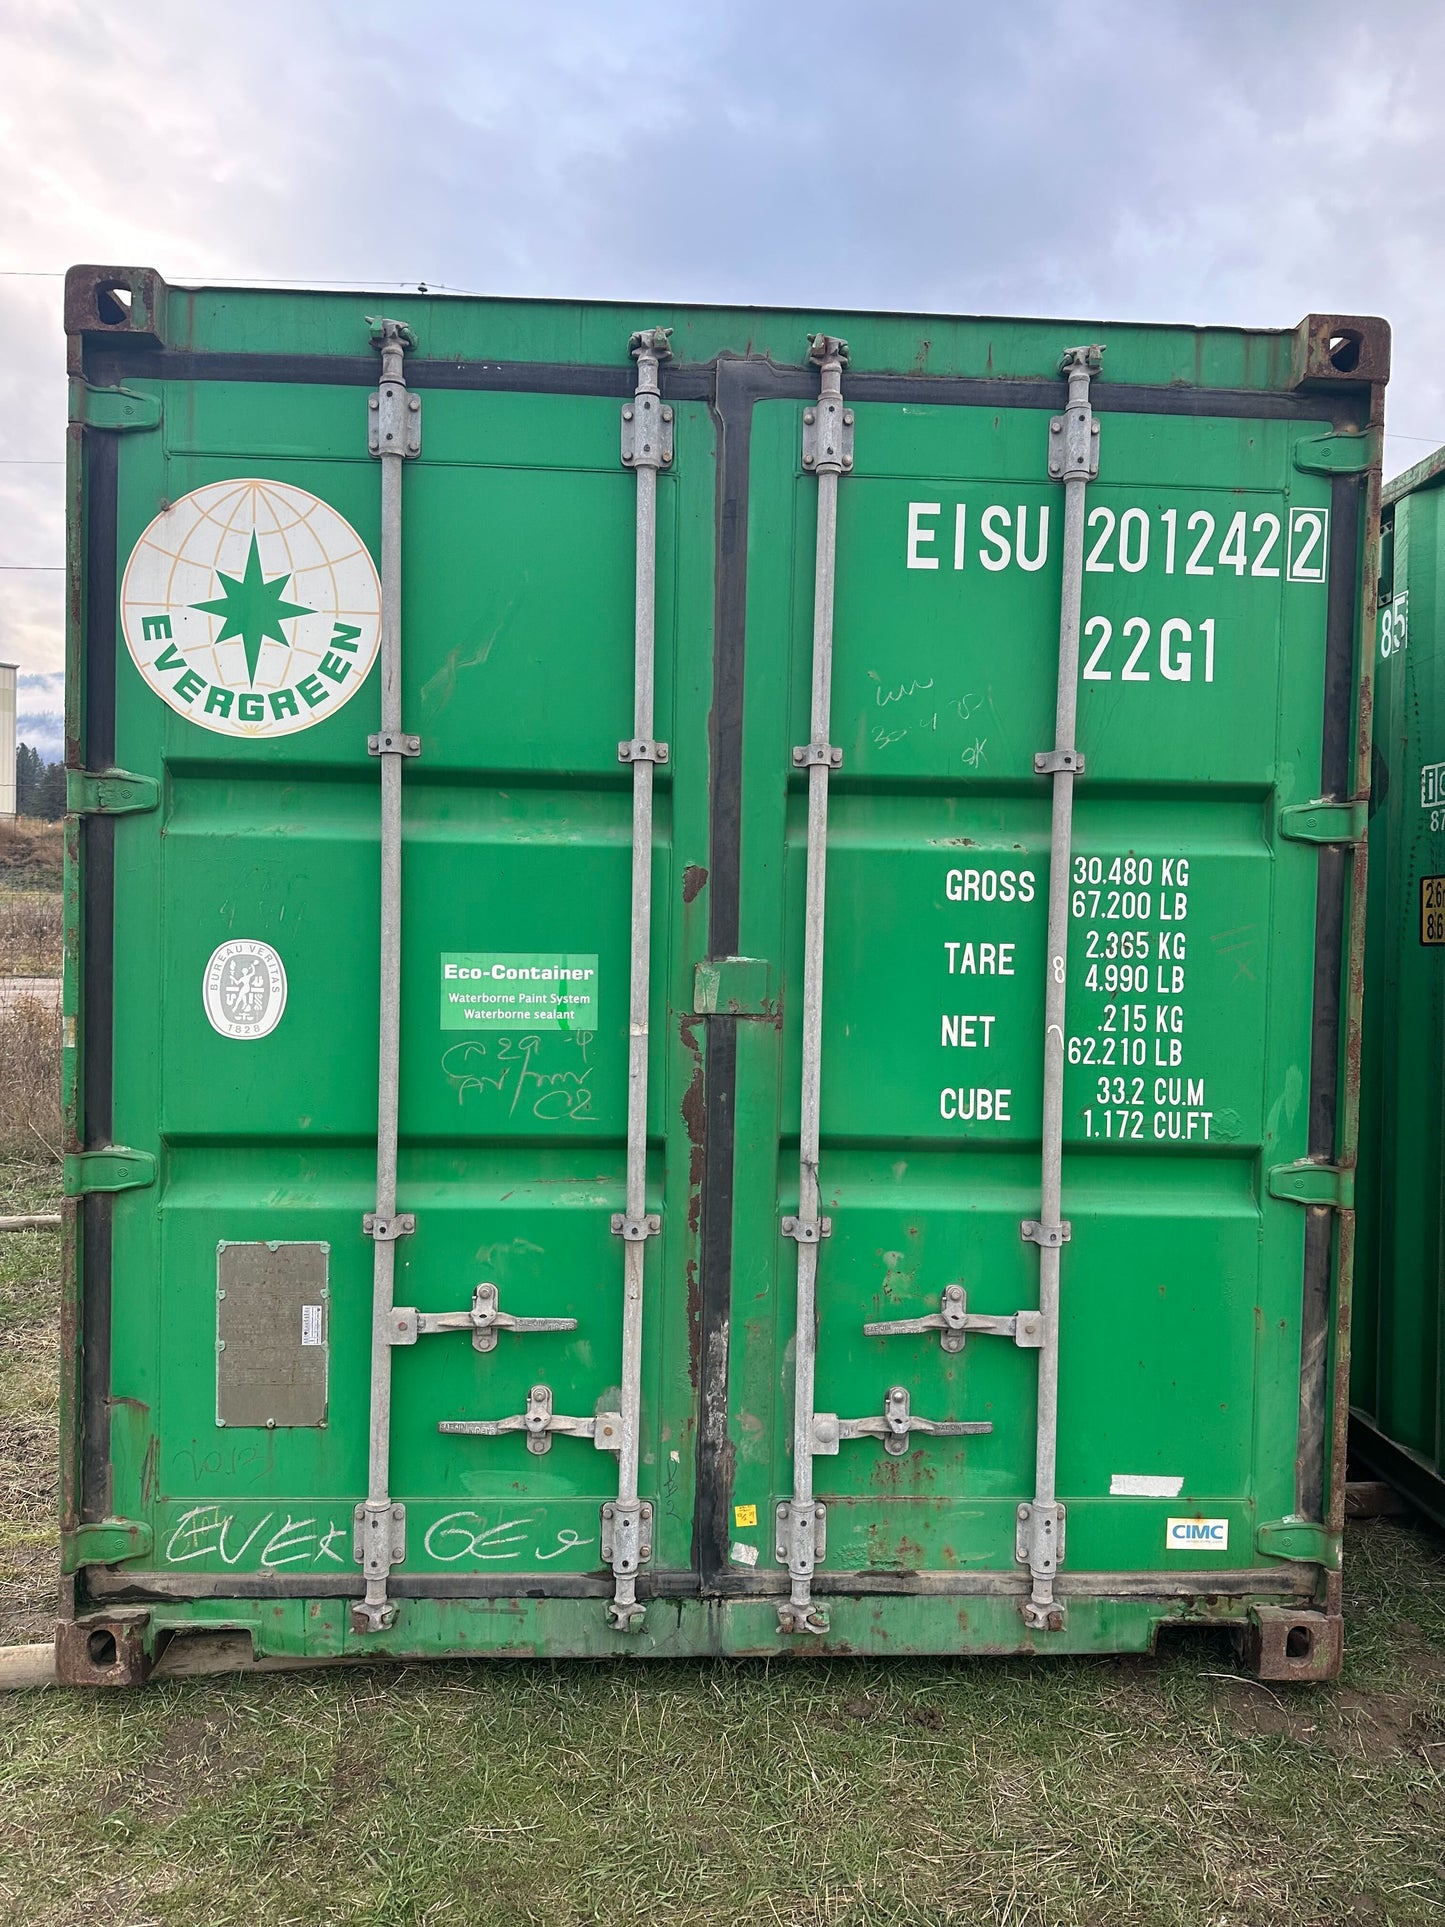 Cargo Worthy Used 20’ Shipping Container / Kamloops & Pritchard, BC